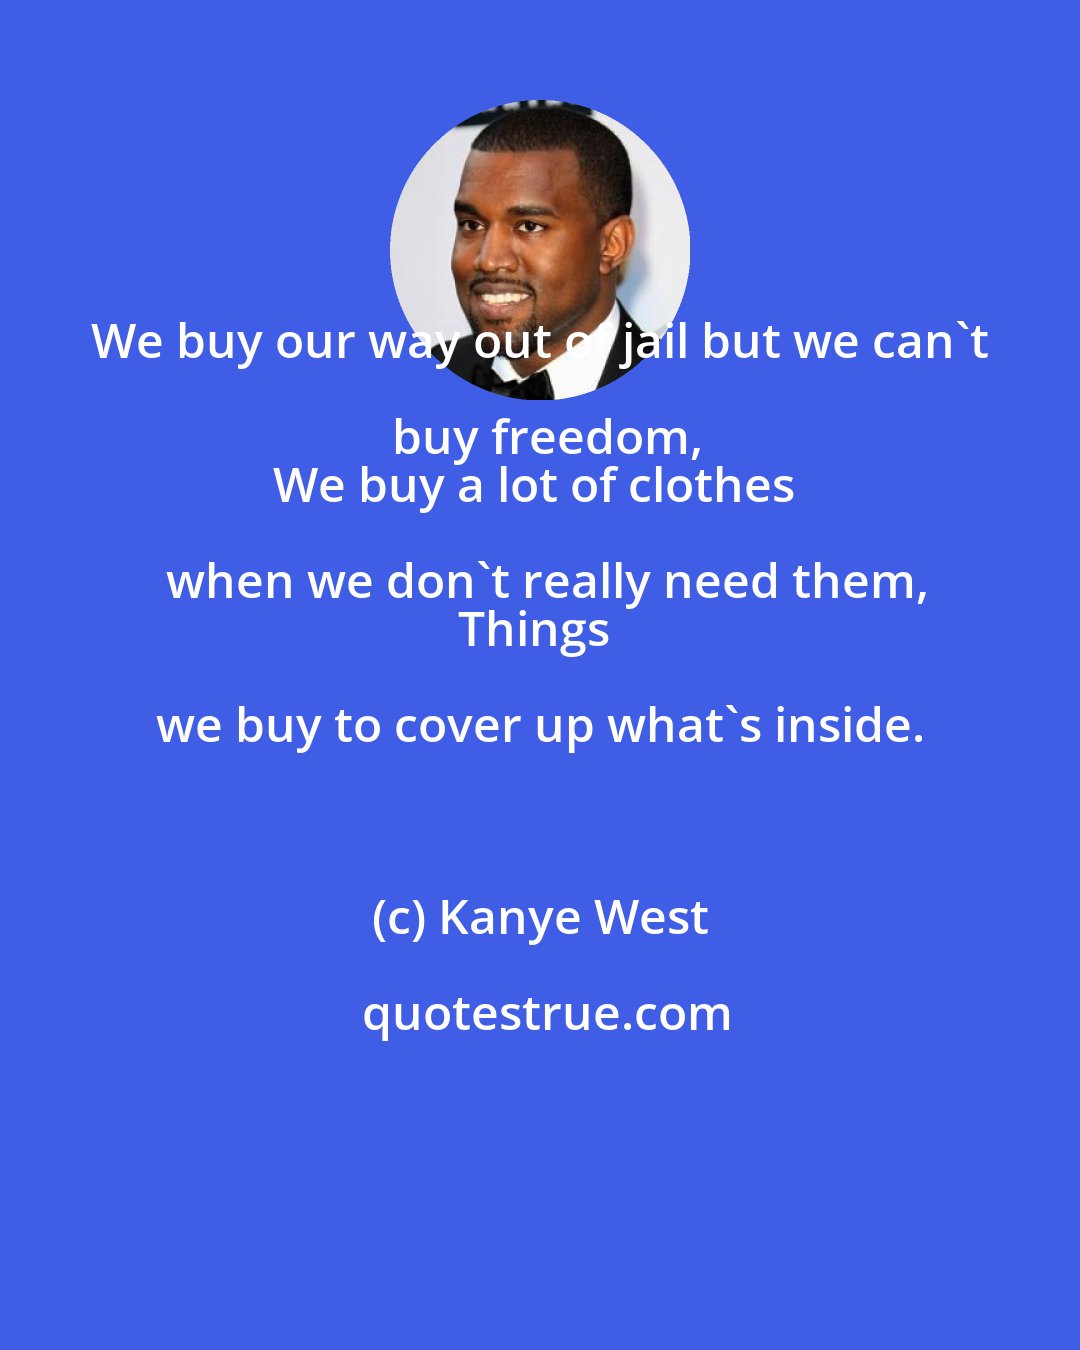 Kanye West: We buy our way out of jail but we can't buy freedom,
We buy a lot of clothes when we don't really need them,
Things we buy to cover up what's inside.